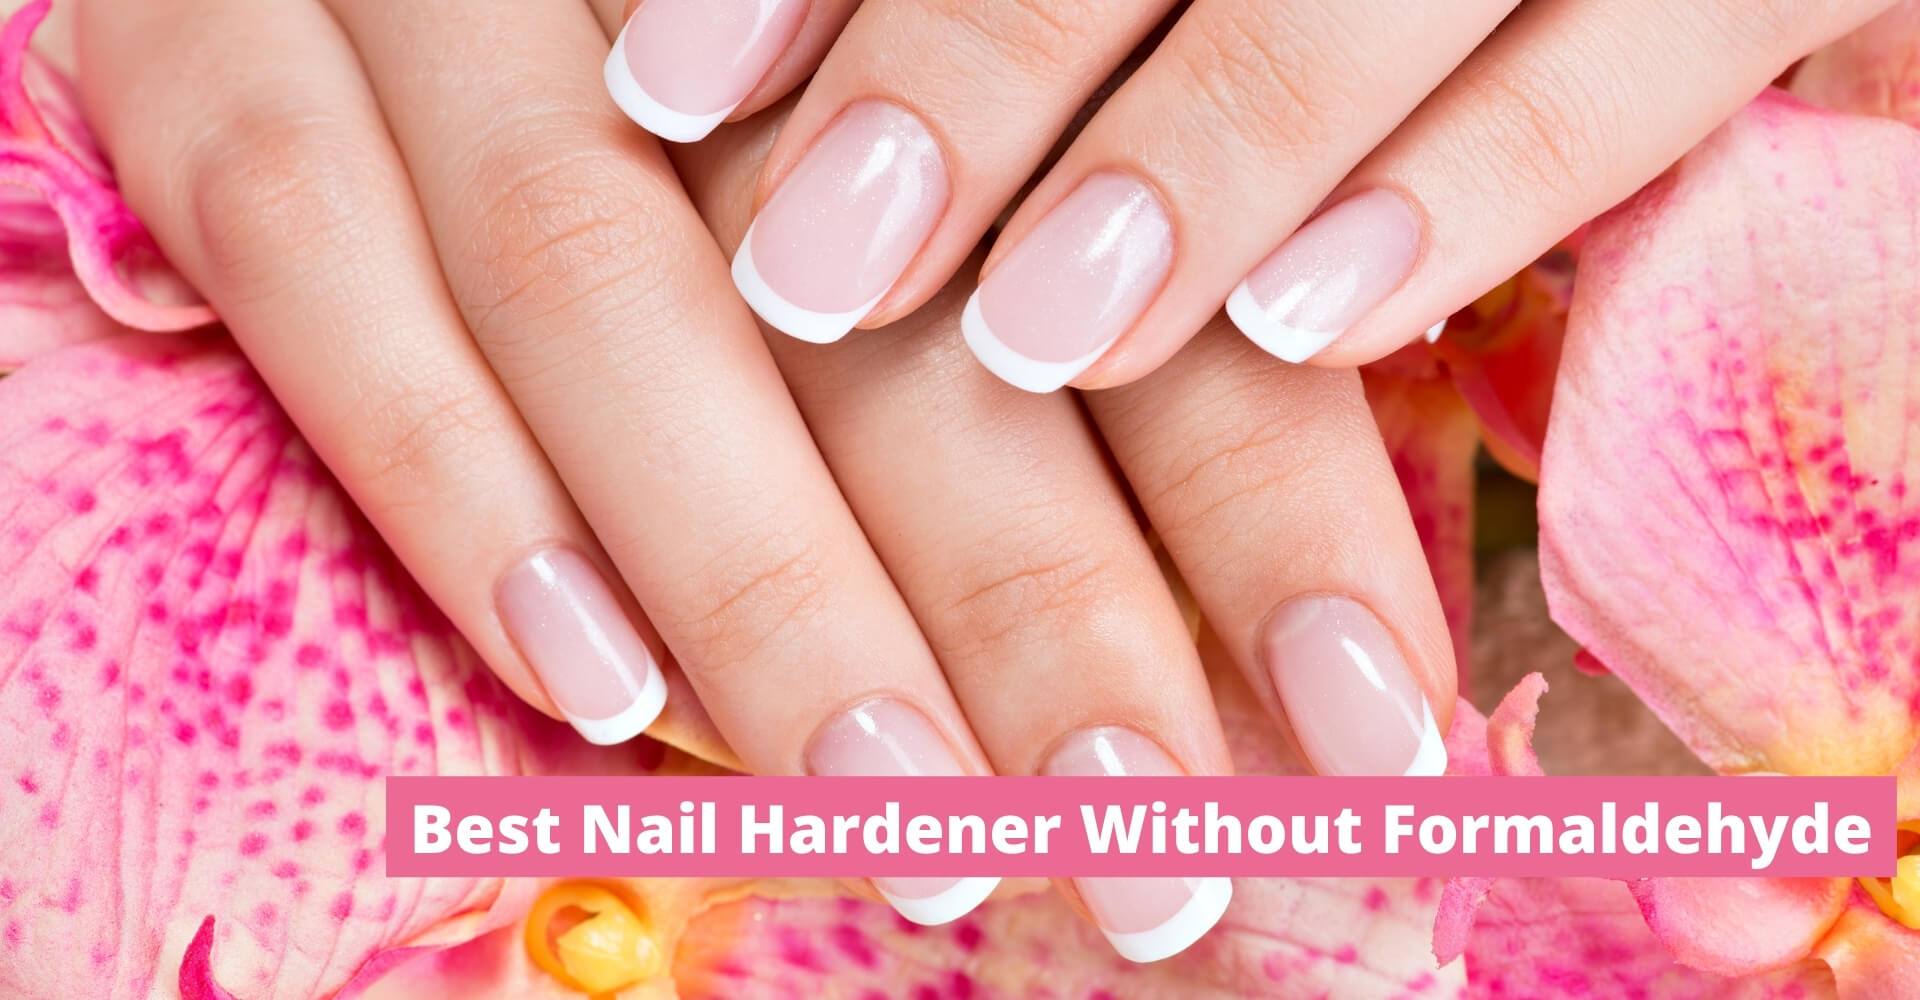 Best Nail Hardener Without Formaldehyde